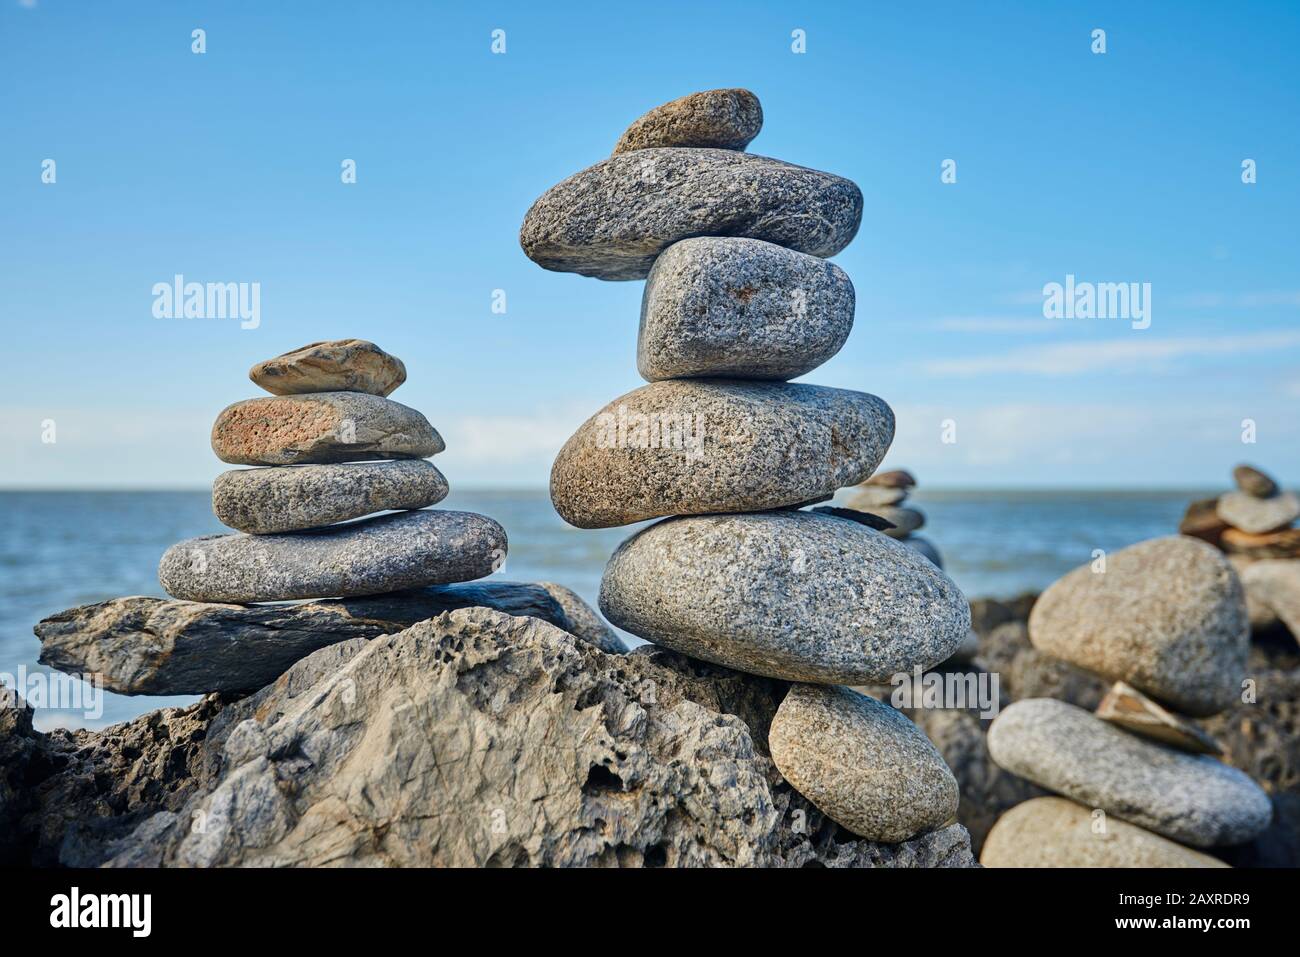 Stones, cairn at the beach, between Cairns and Port Douglas in spring, Queensland, Australia Stock Photo